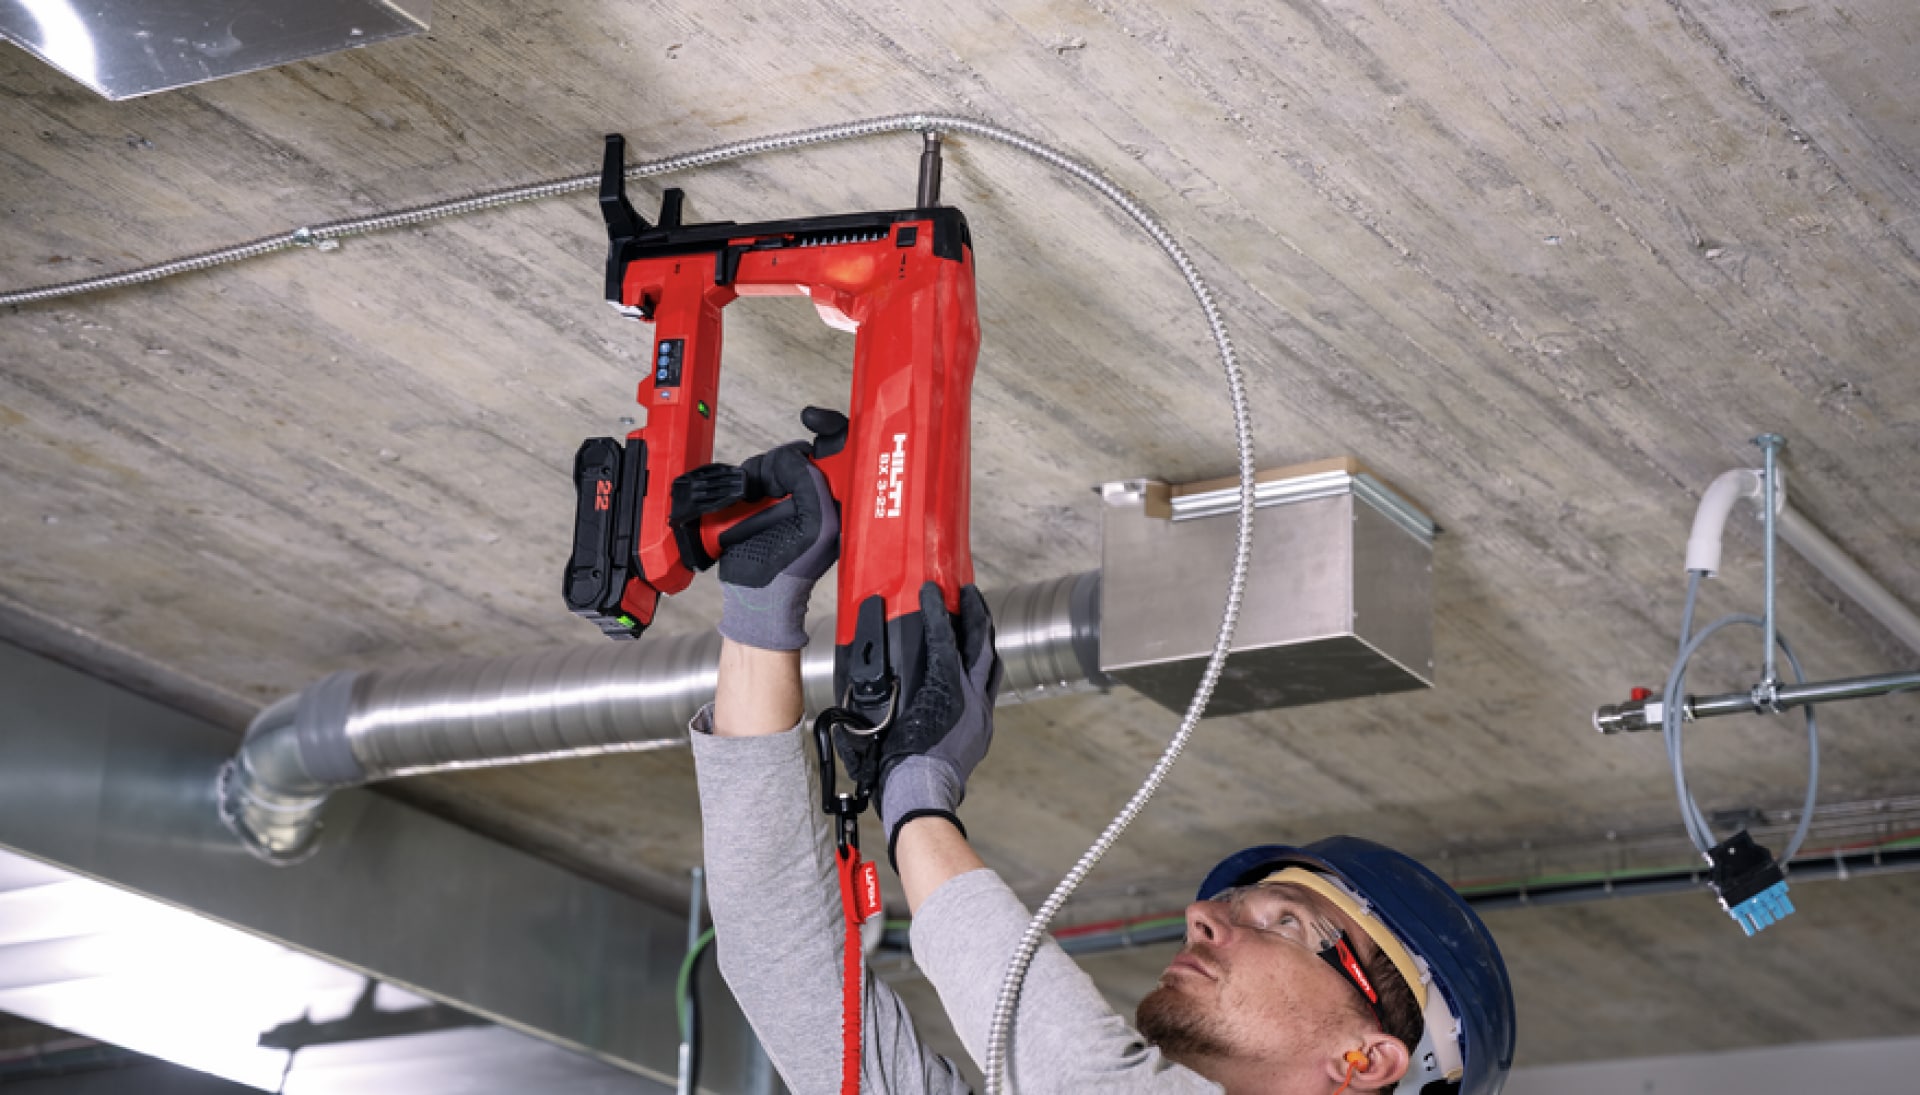 Power Tools, Fasteners and Software for Construction - Hilti USA - Hilti USA